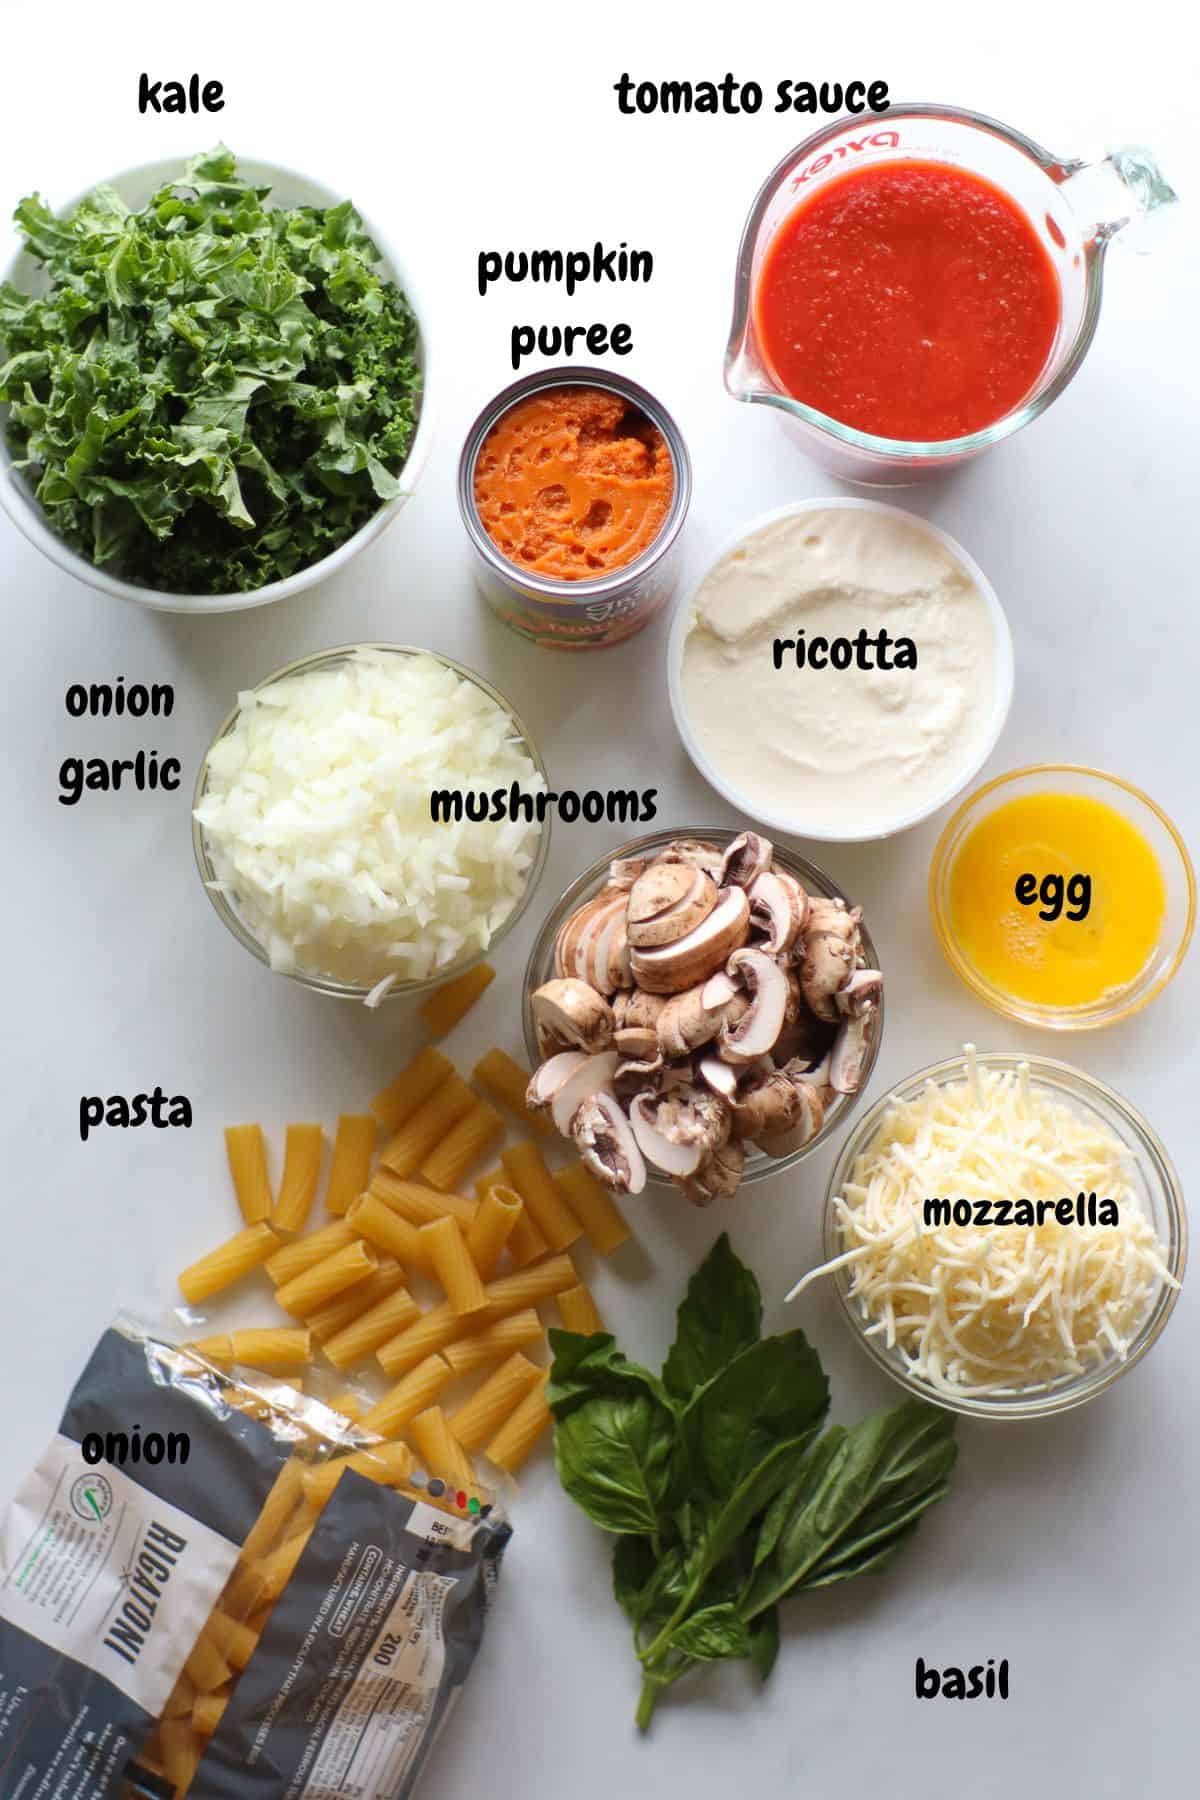 All the ingredients laid out on a white bacckground.